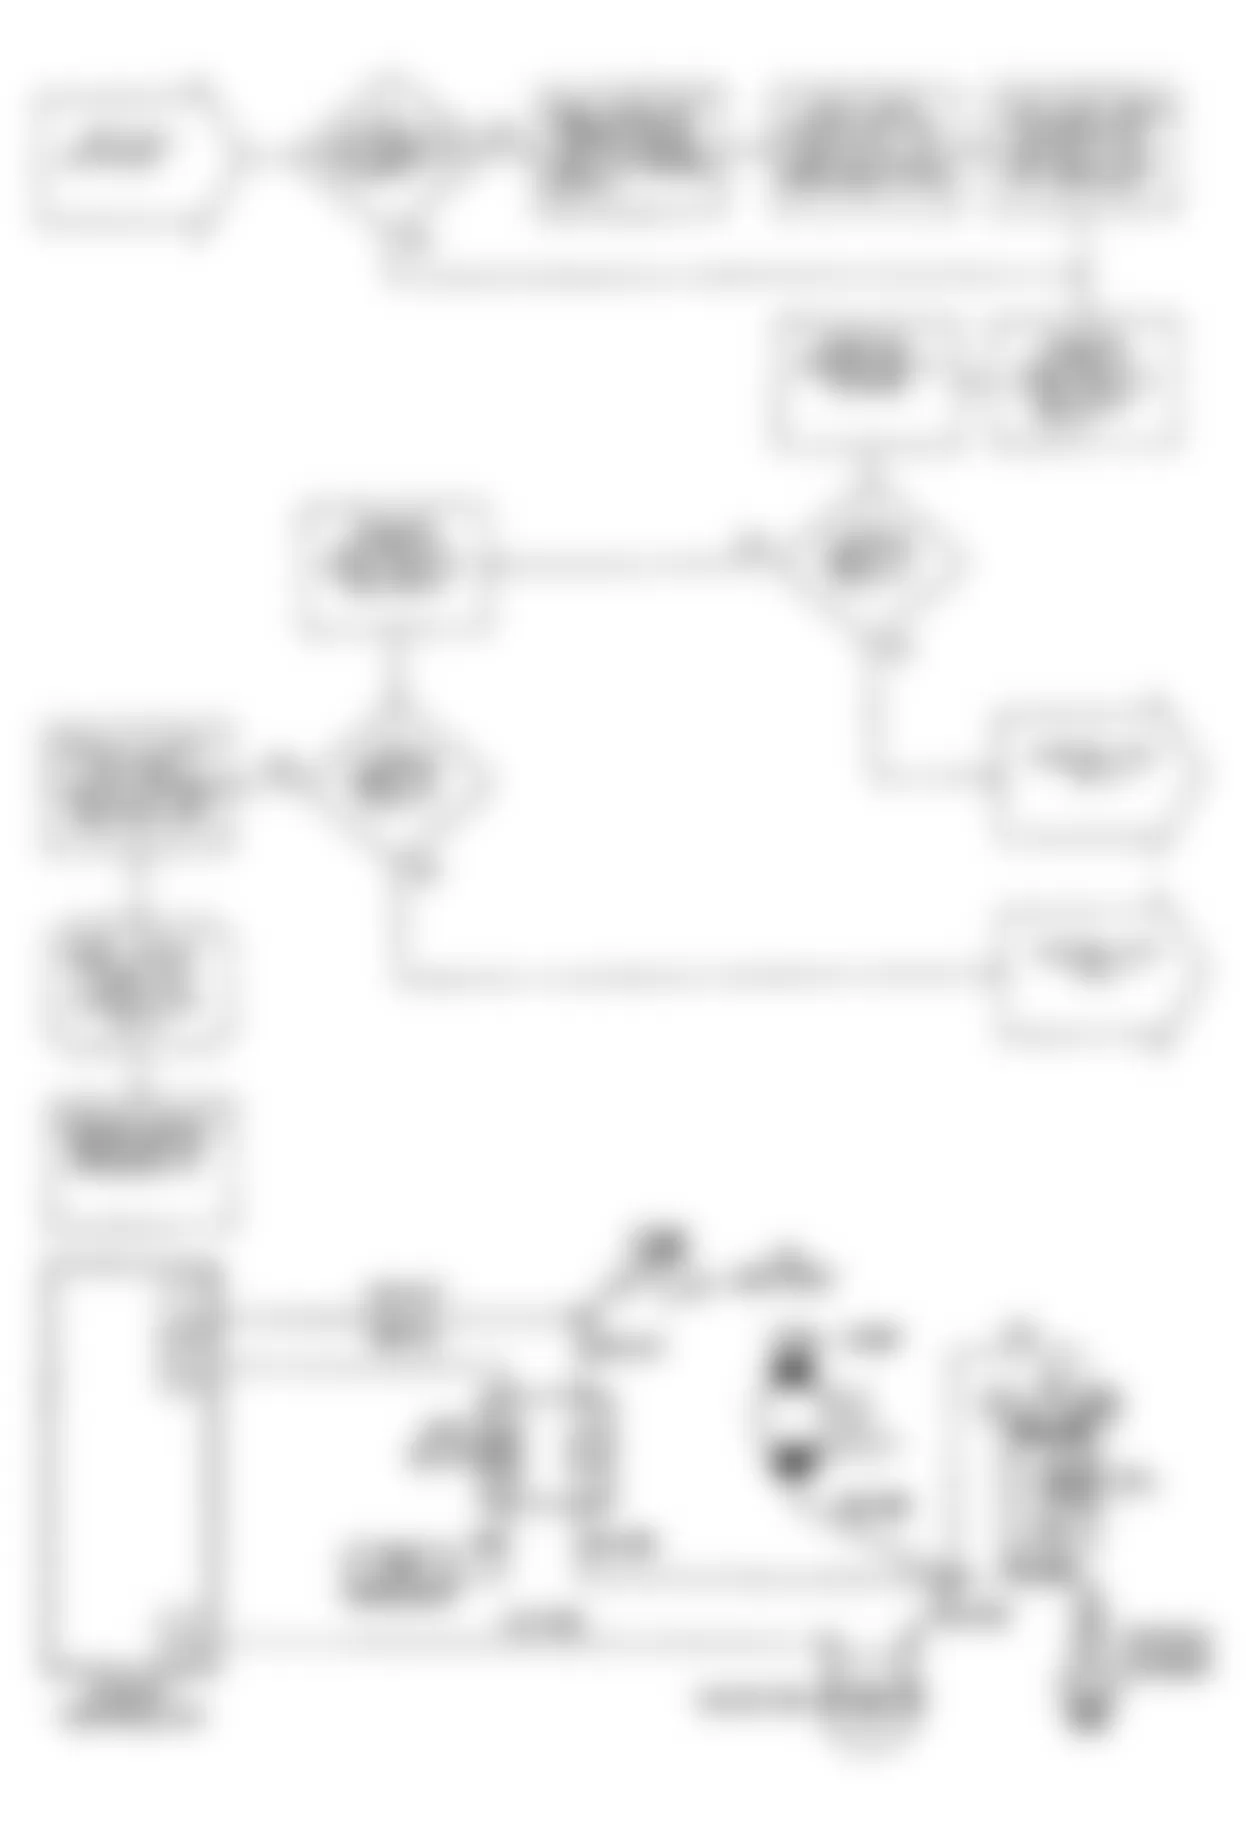 Chrysler LeBaron 1990 - Component Locations -  NS-1: Flow Chart (3 of 3)